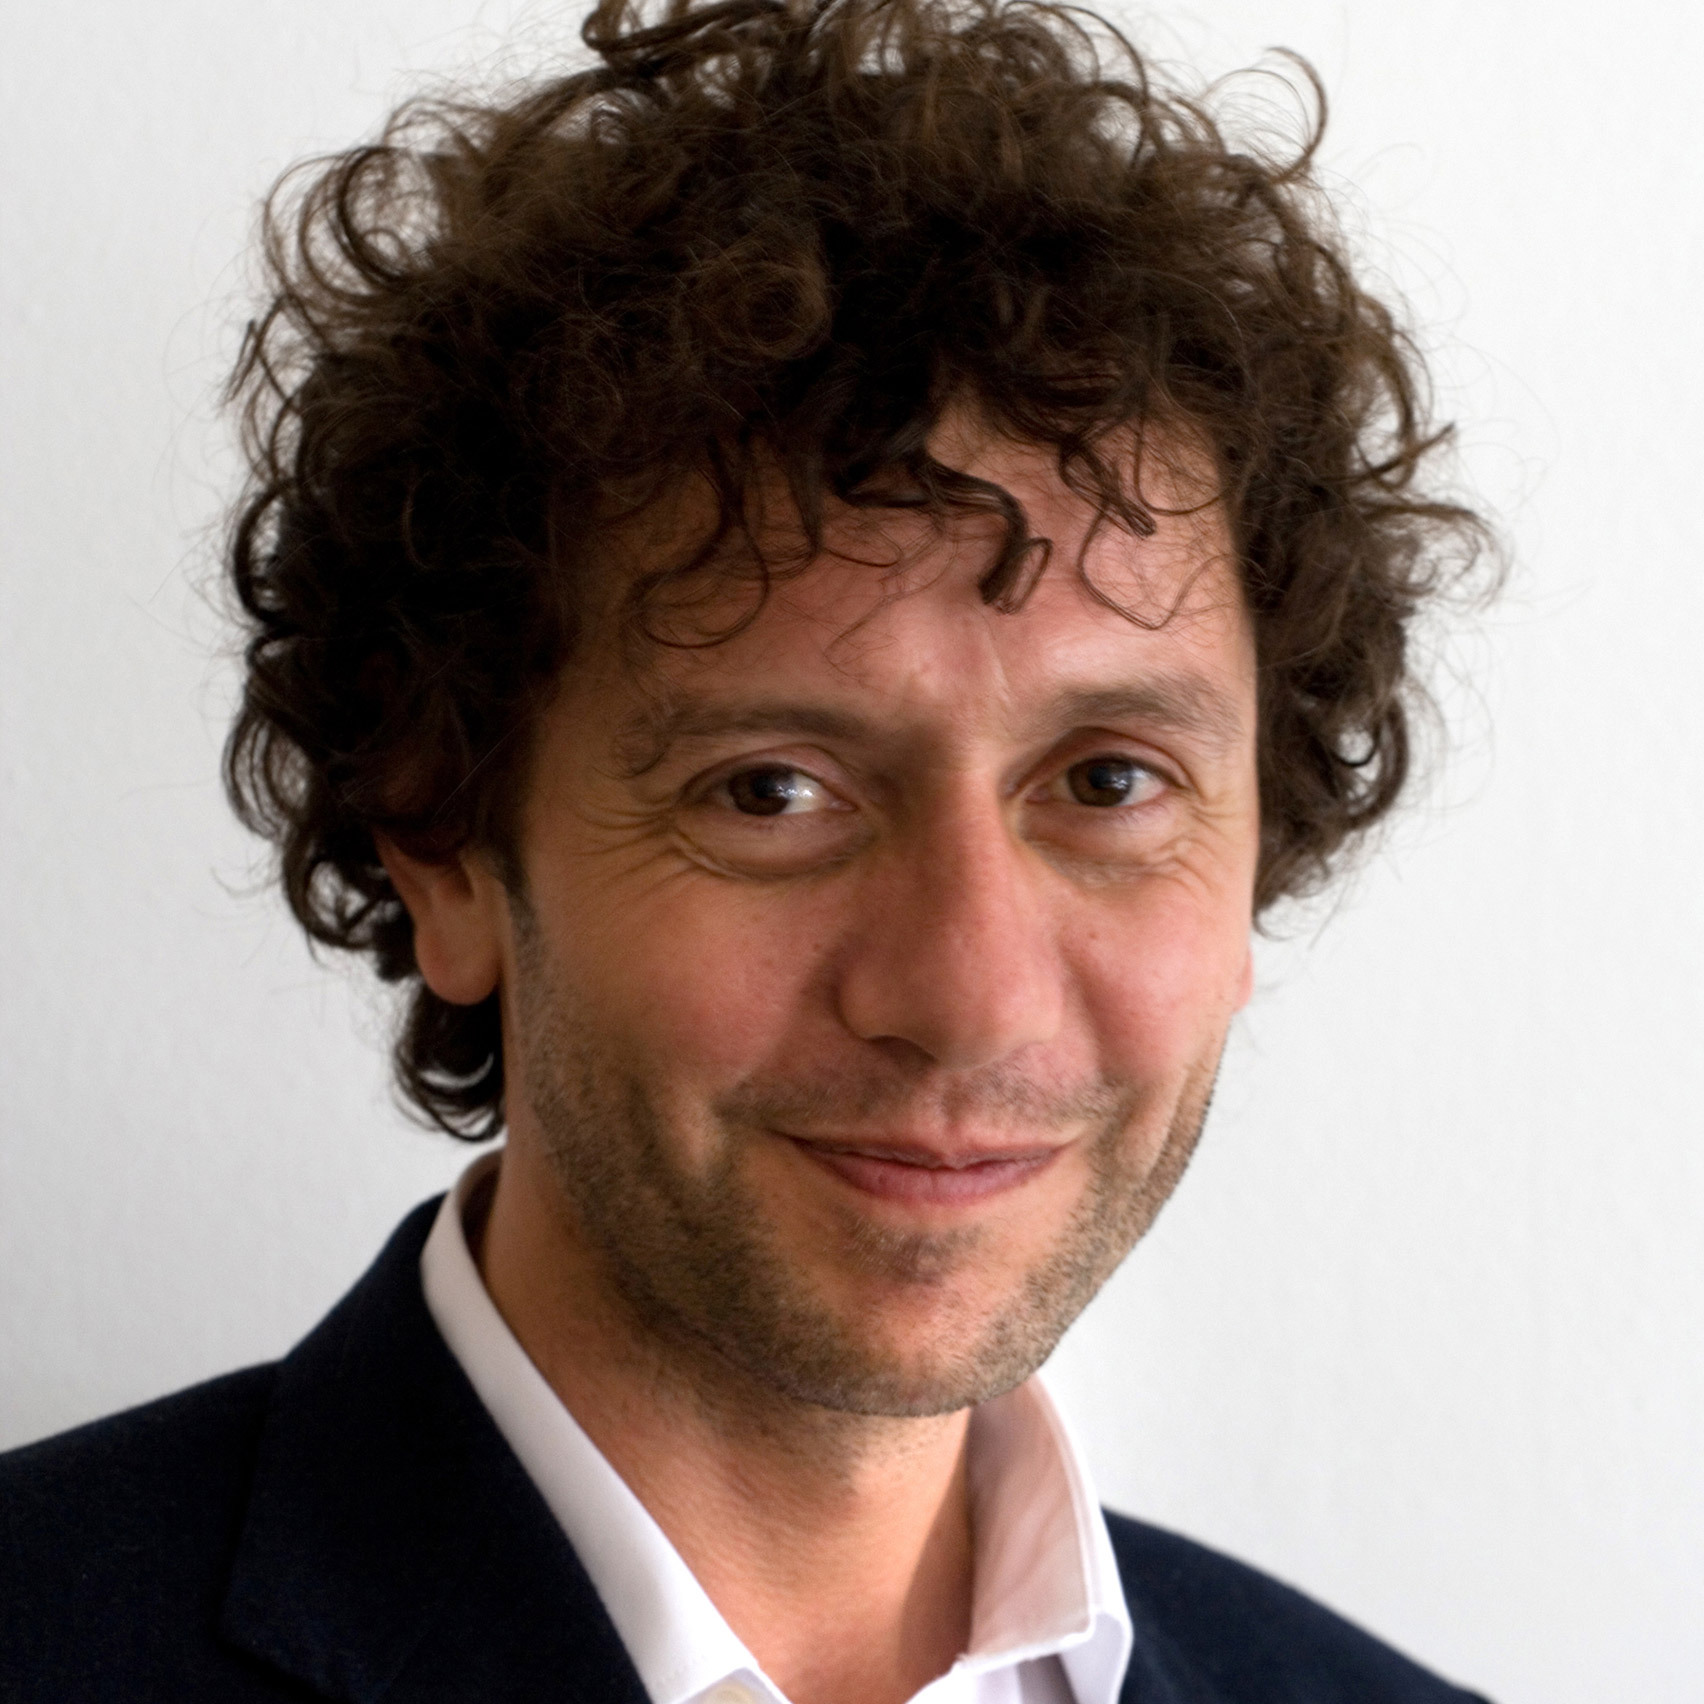 Dezeen's founder and editor-in-chief Marcus Fairs